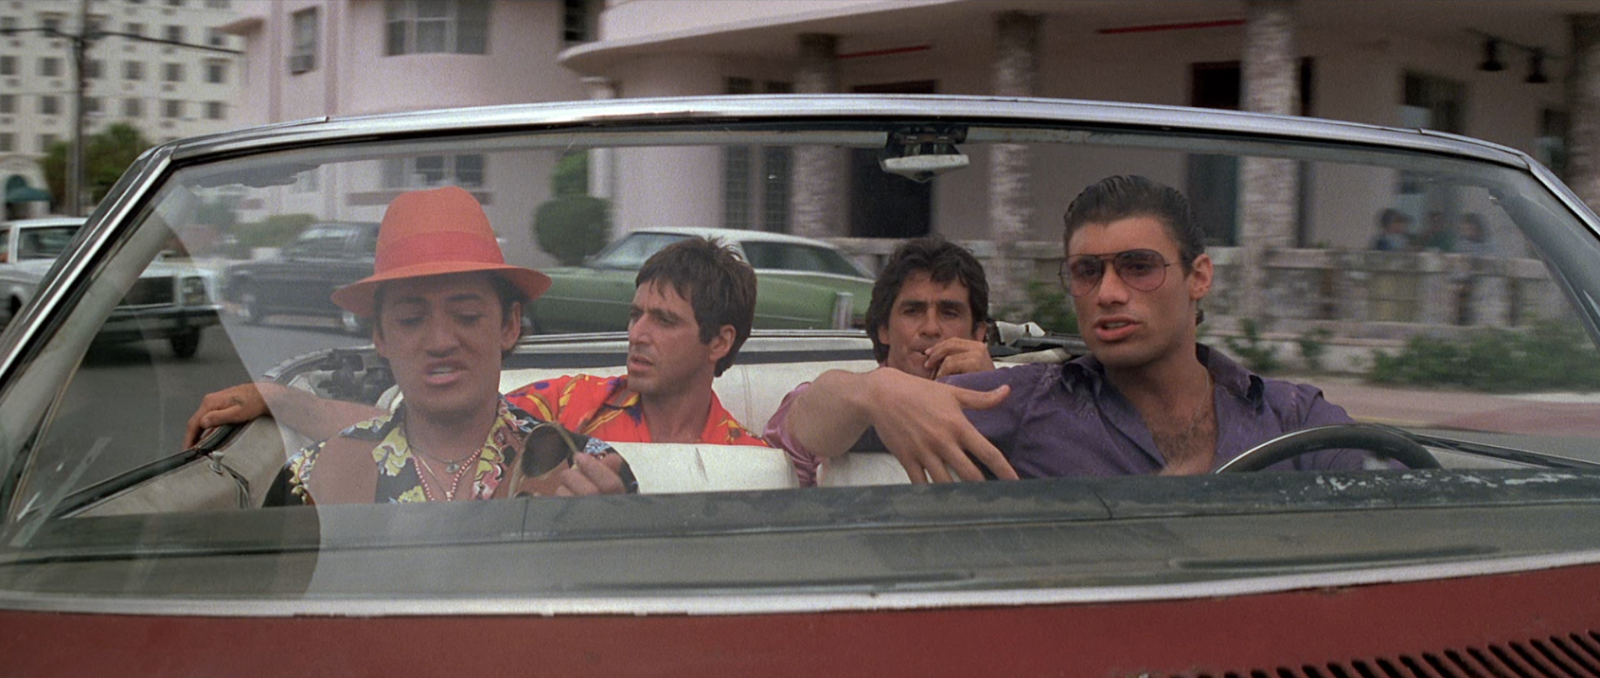 Al Pacino in the back seat of a convertible with 3 others in the car